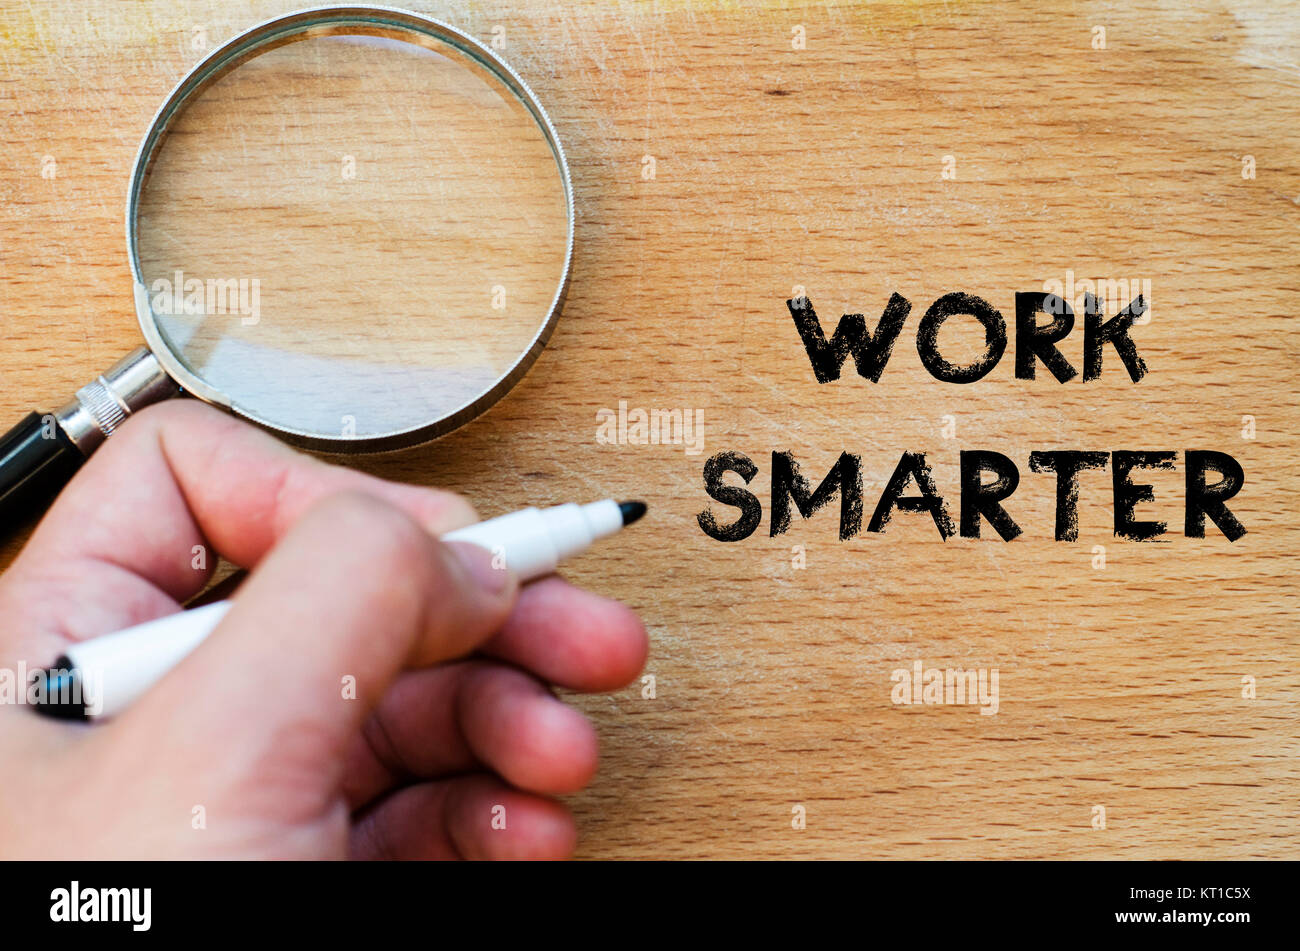 Work smarter text concept Stock Photo